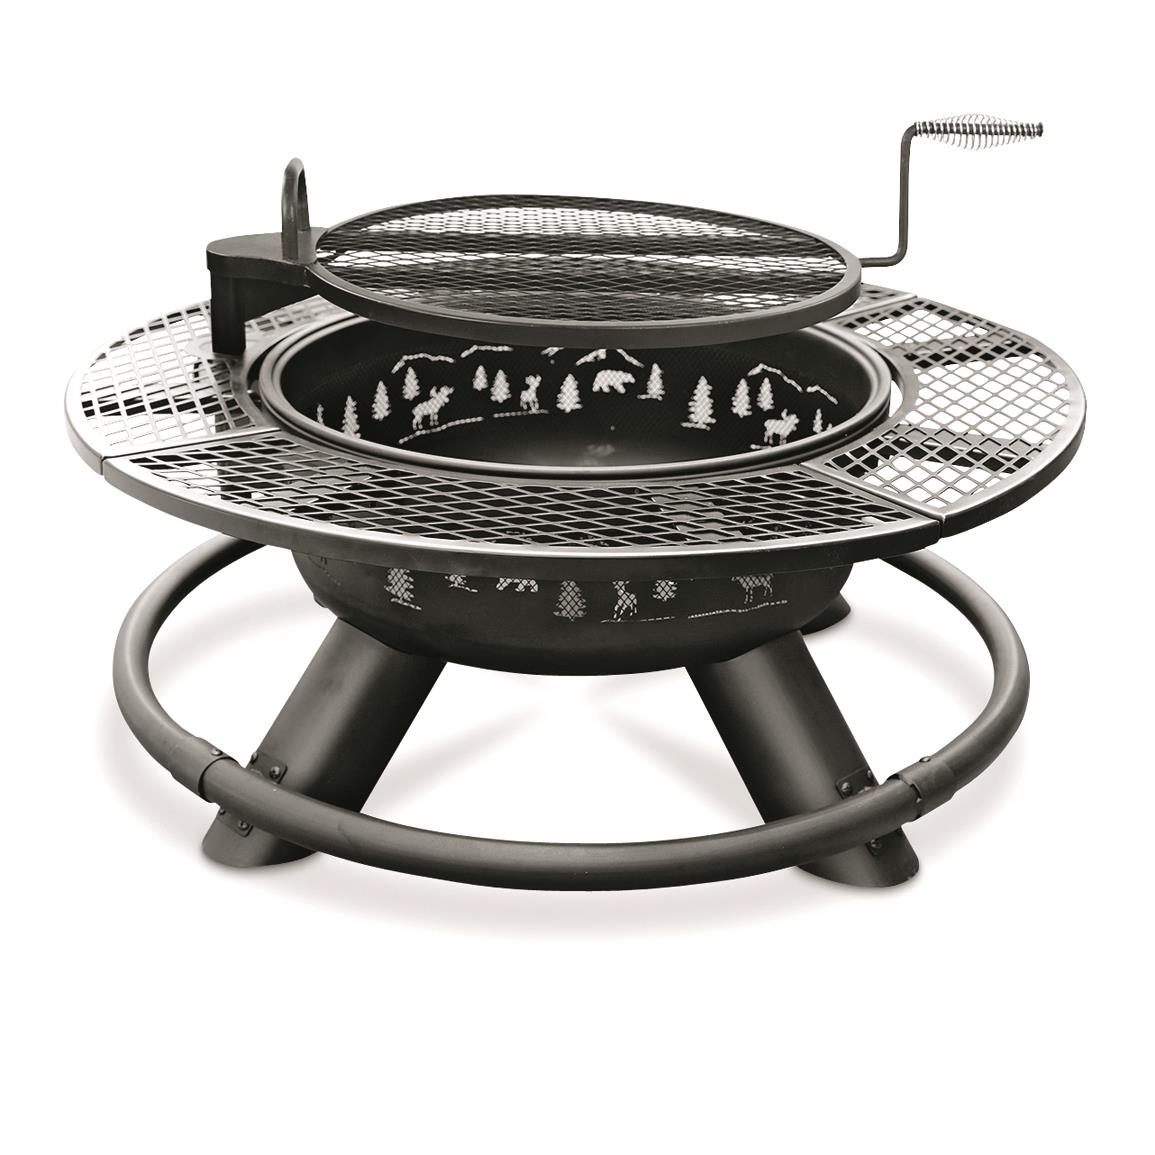 Castlecreek 47 Fire Pit With Bbq Grate, Big Horn Outdoors Fire Pit